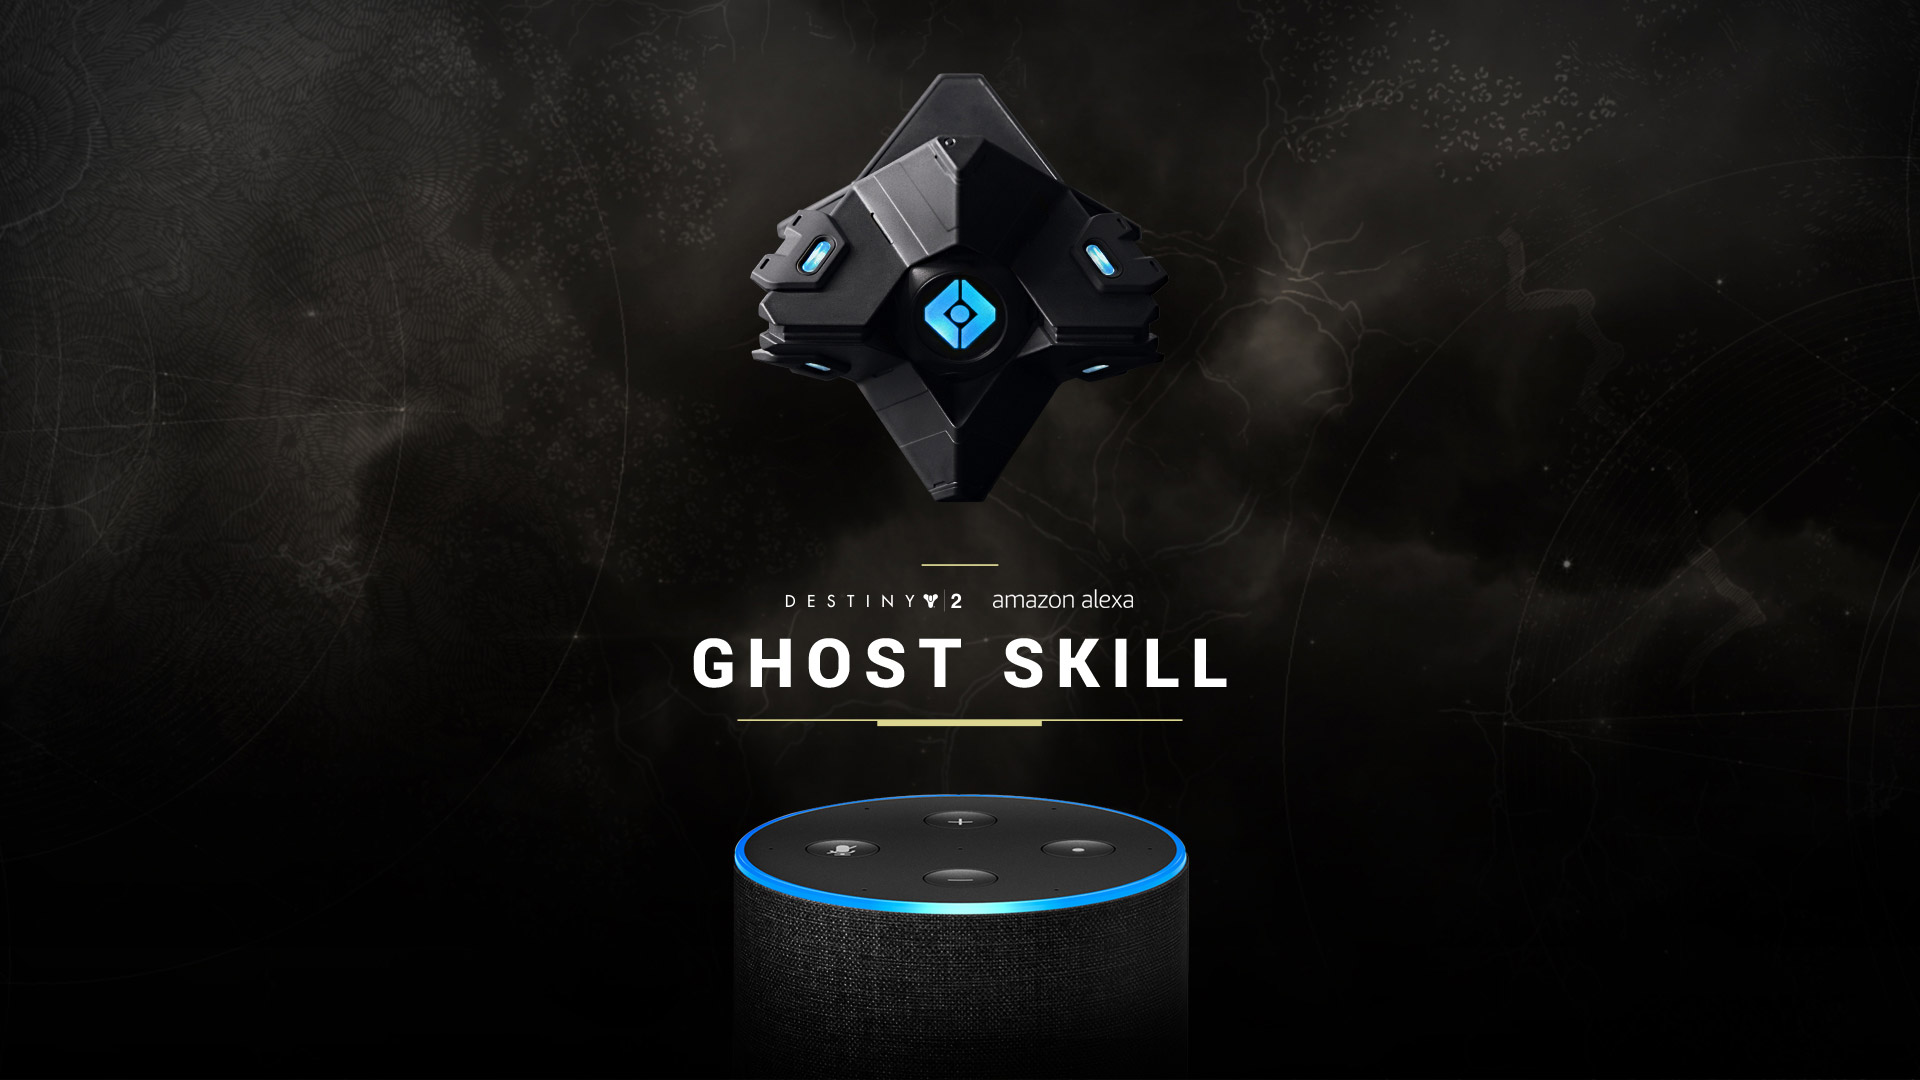 Activision. Destiny 2 Ghost Skill. The One Club